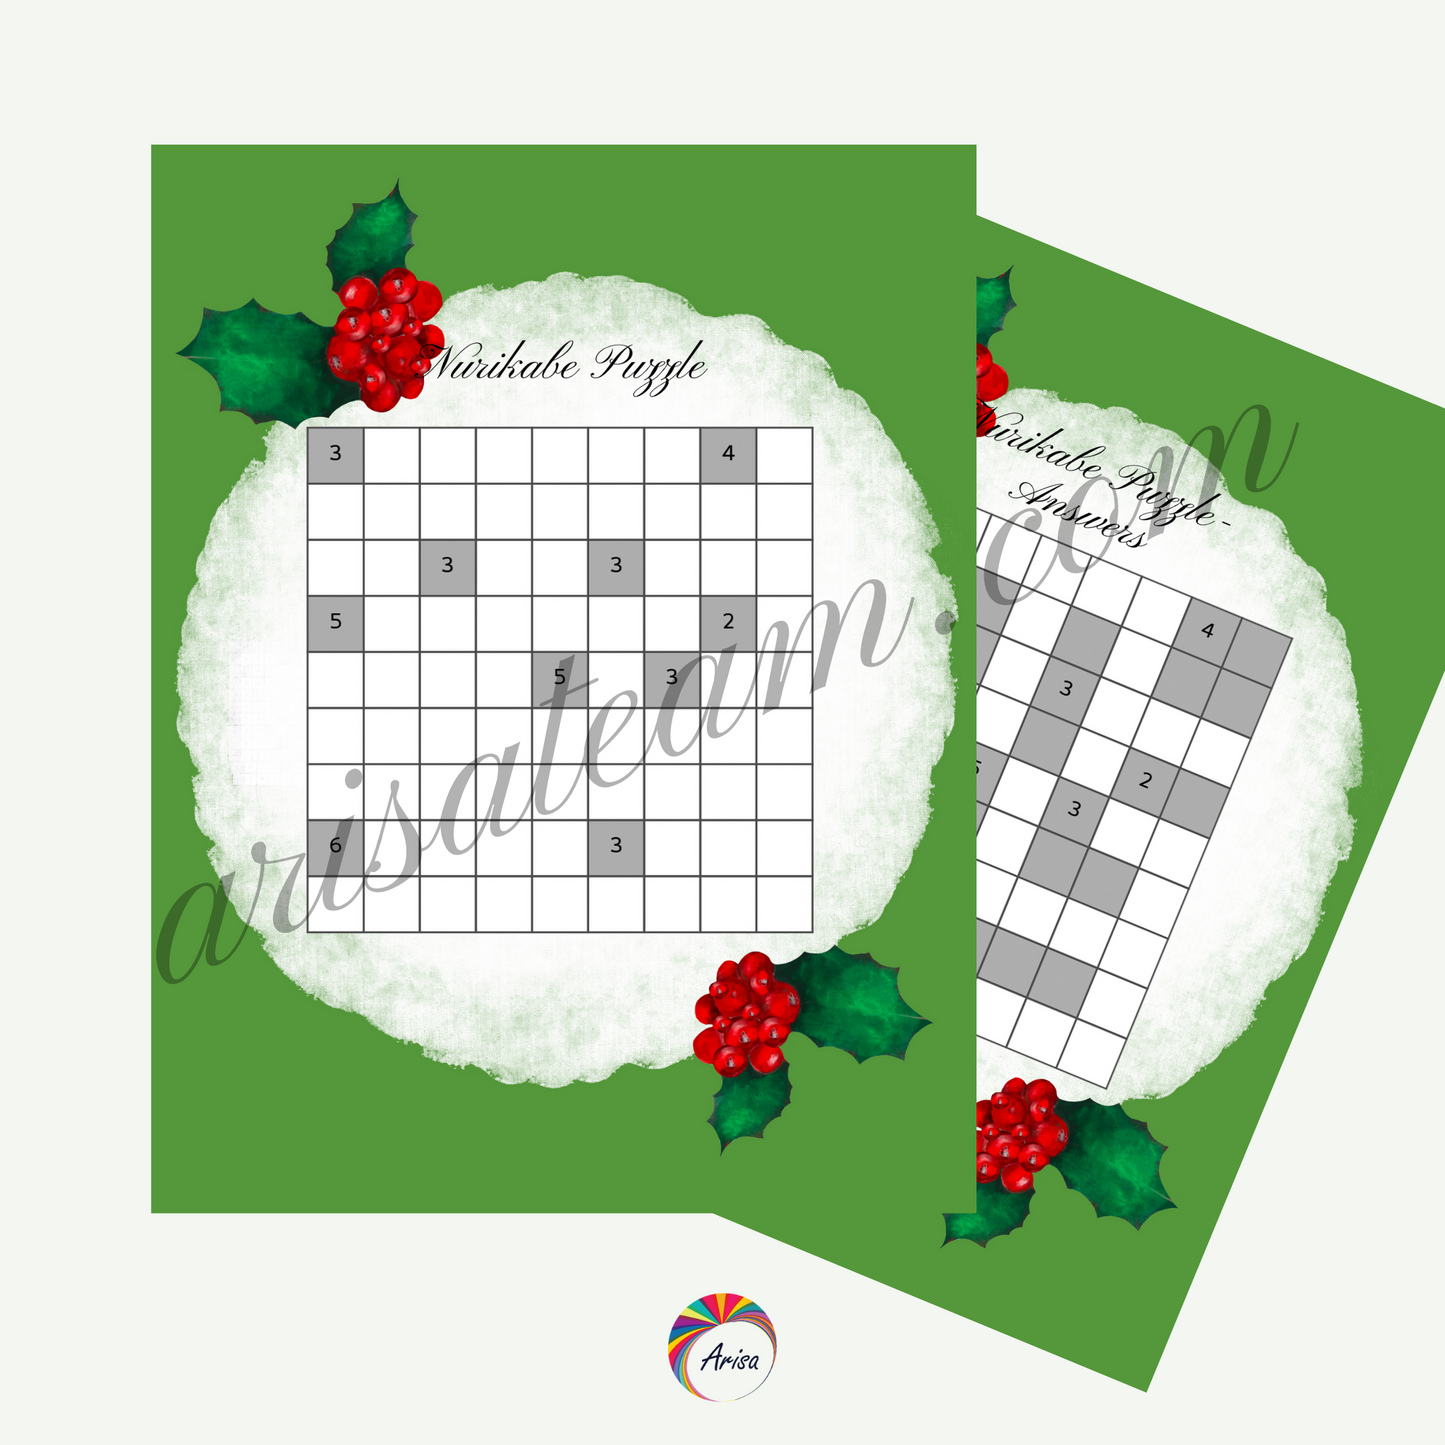 The nurikabe puzzle and its answers of the "Chirstmas Charm Activity Pack" from ArisaTeam